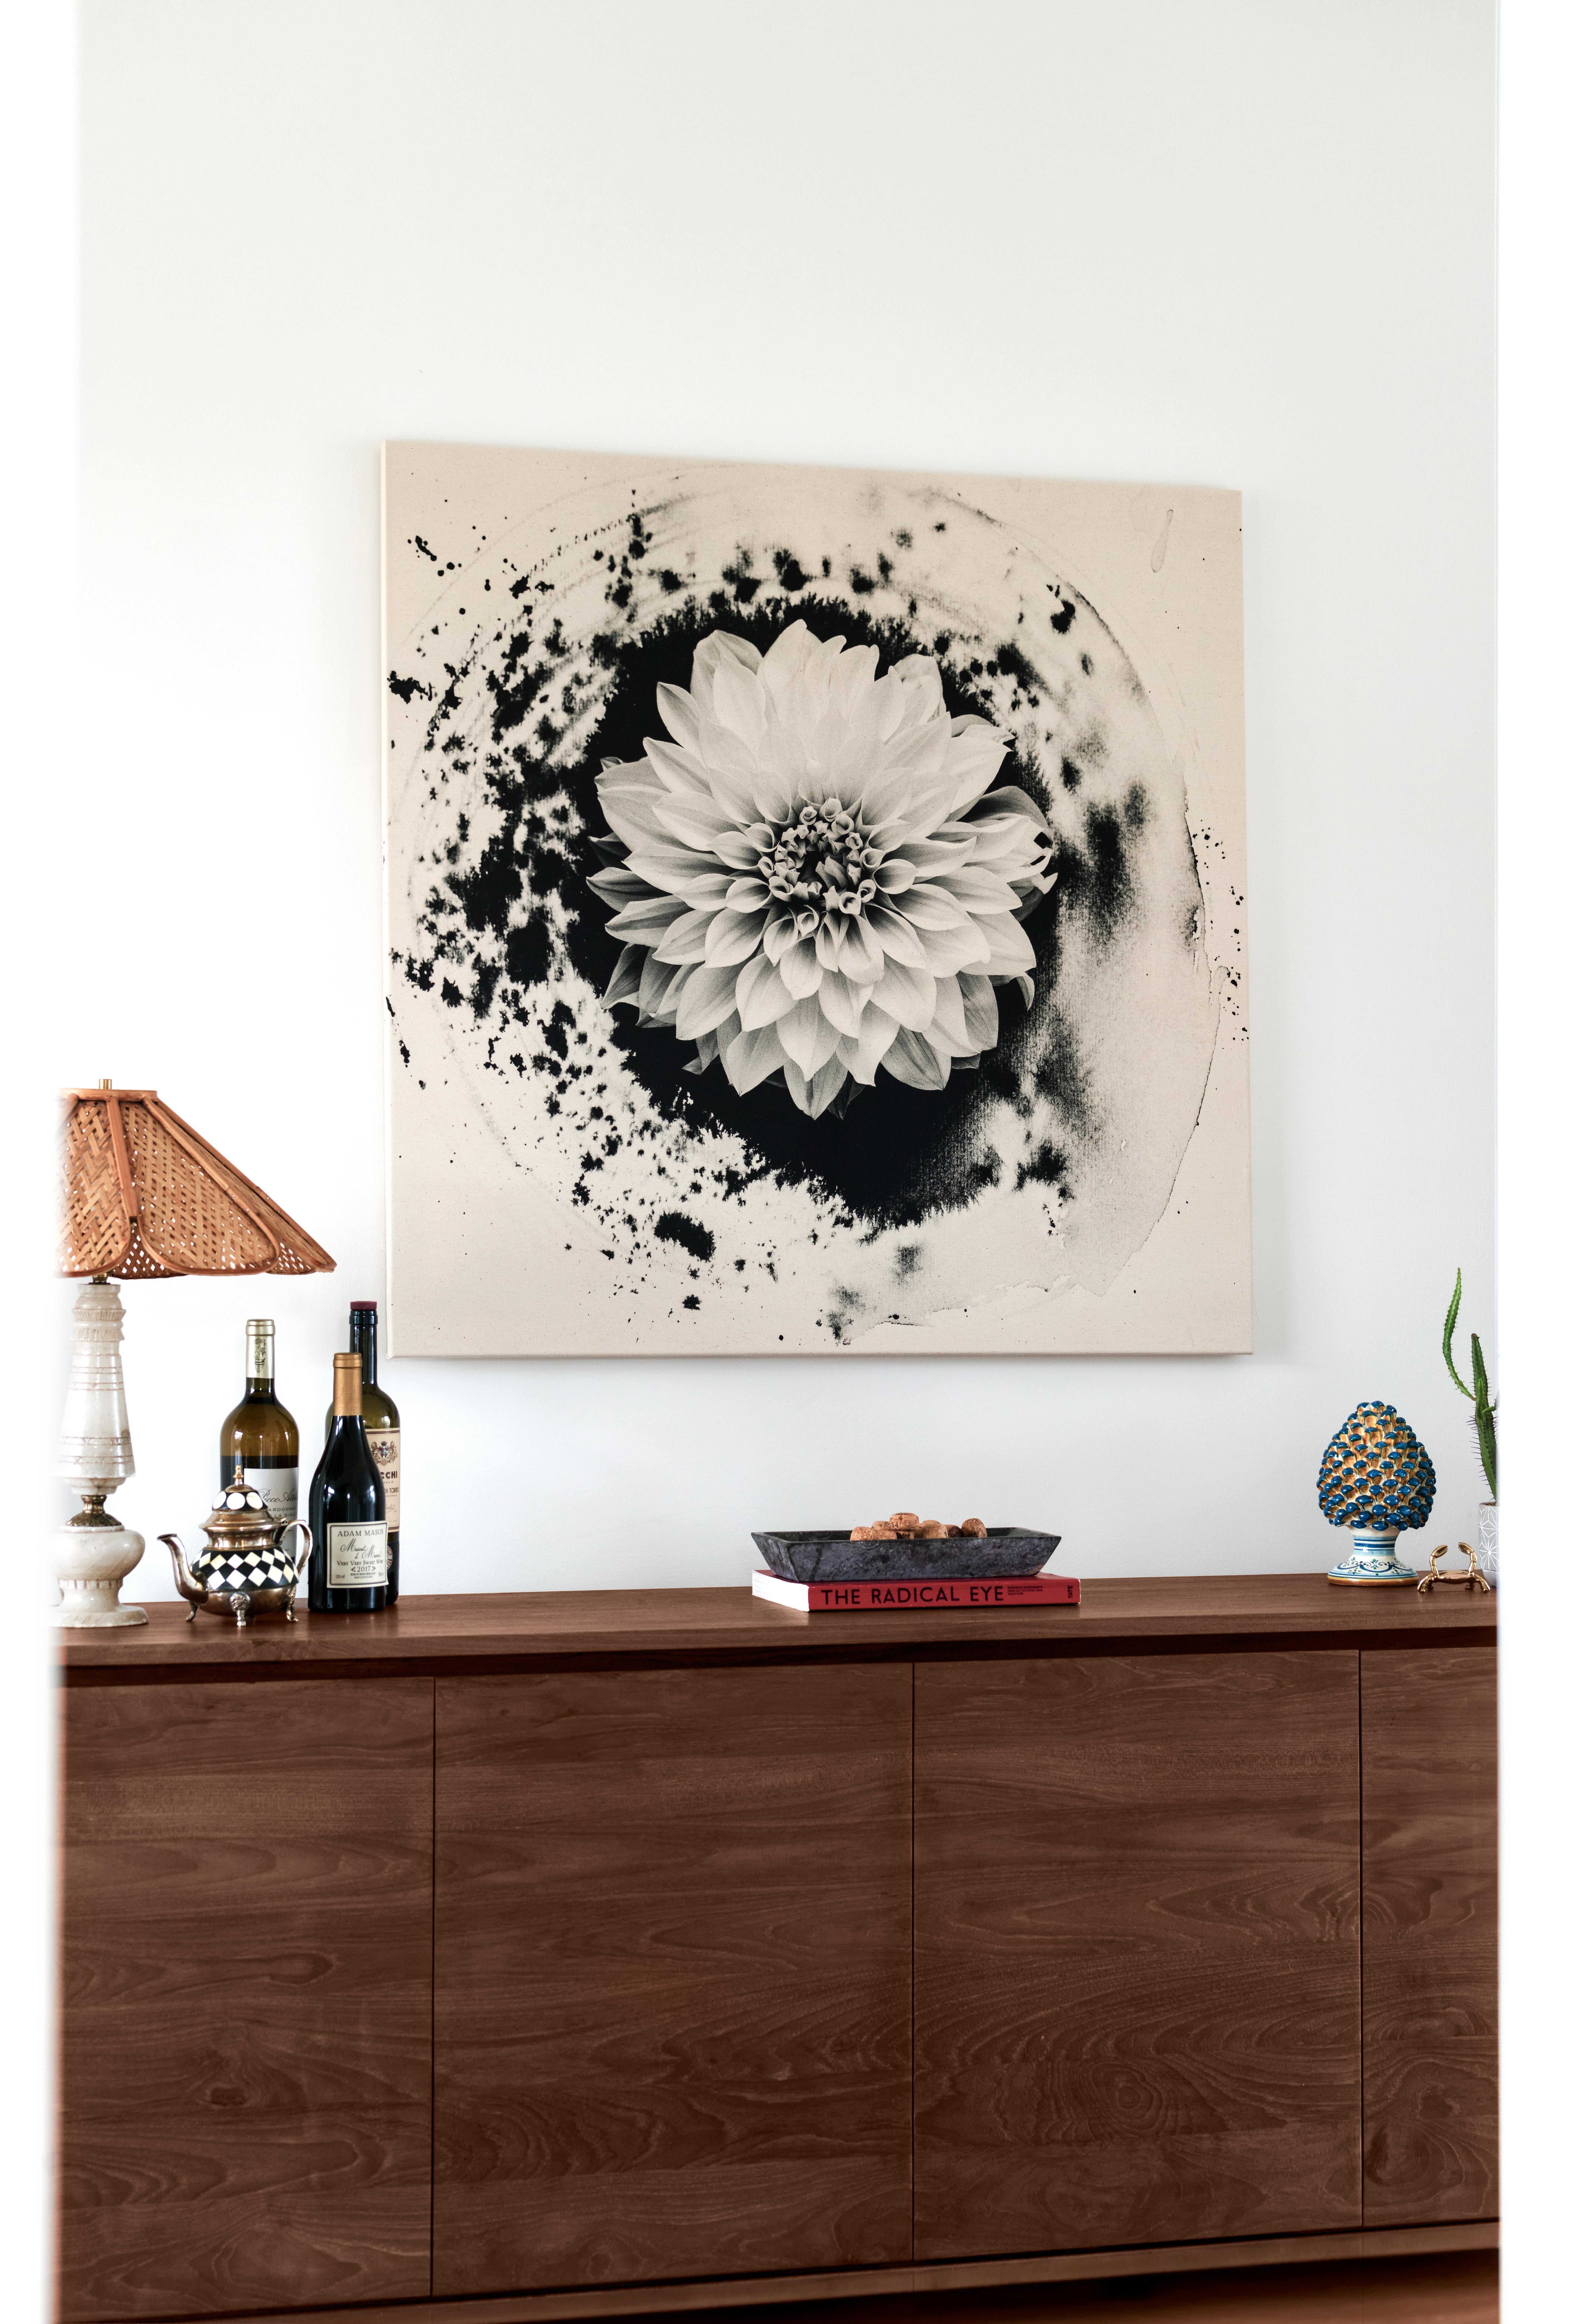 Dahlia on Ink - floral film photography on cotton canvas, Limited edition of 5 - Painting by Ugne Pouwell